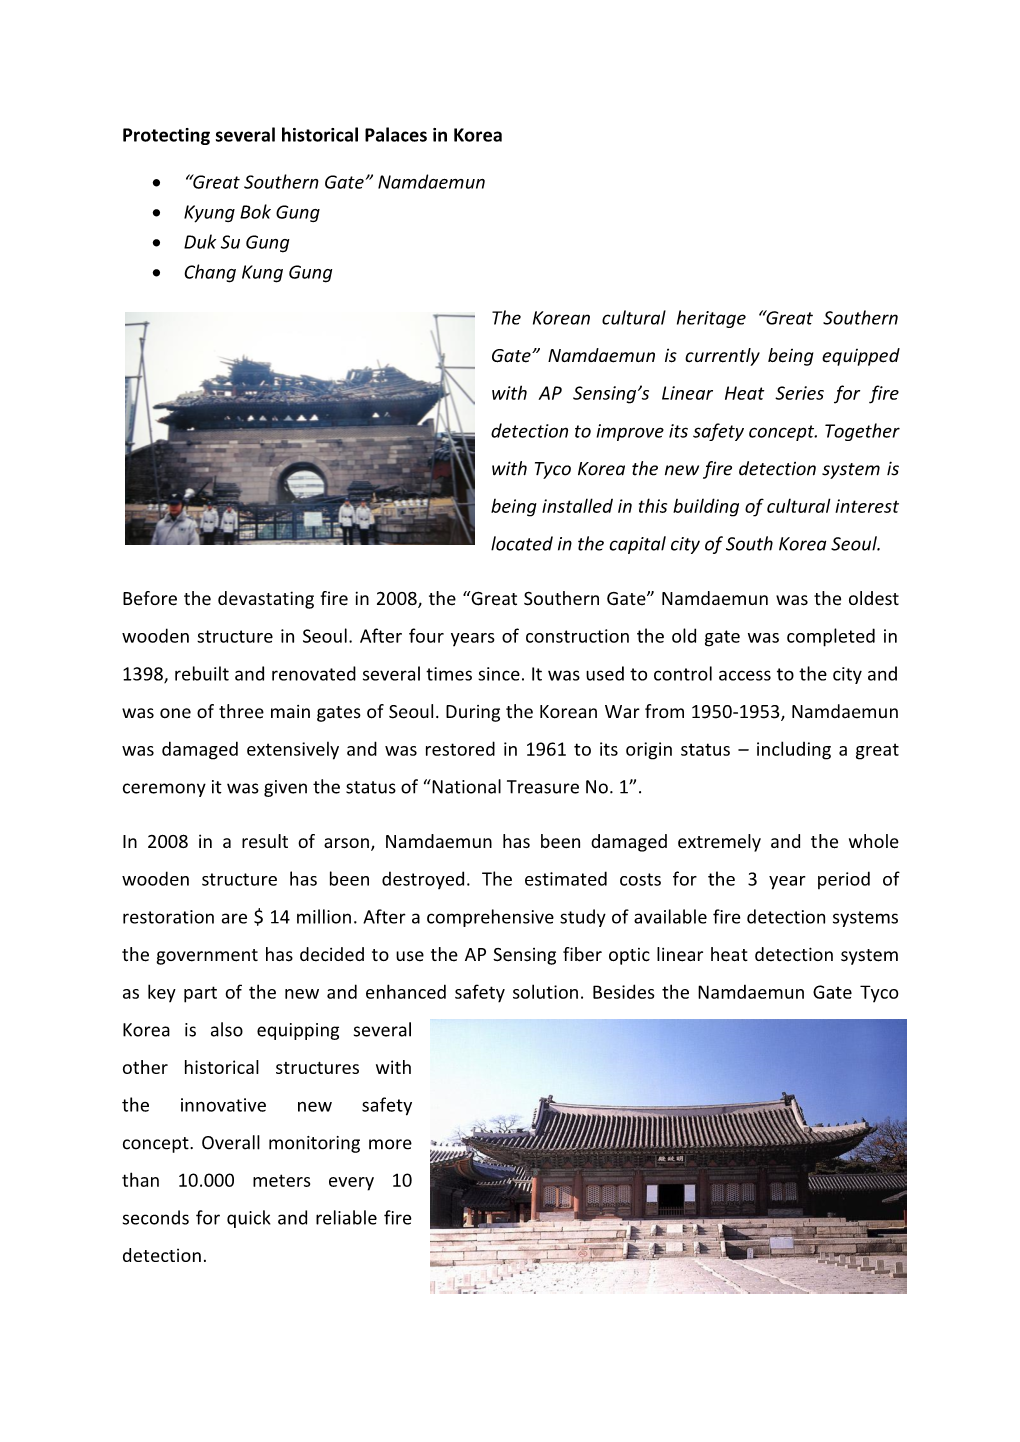 Linear Heat Detection in Historical Korean Palaces